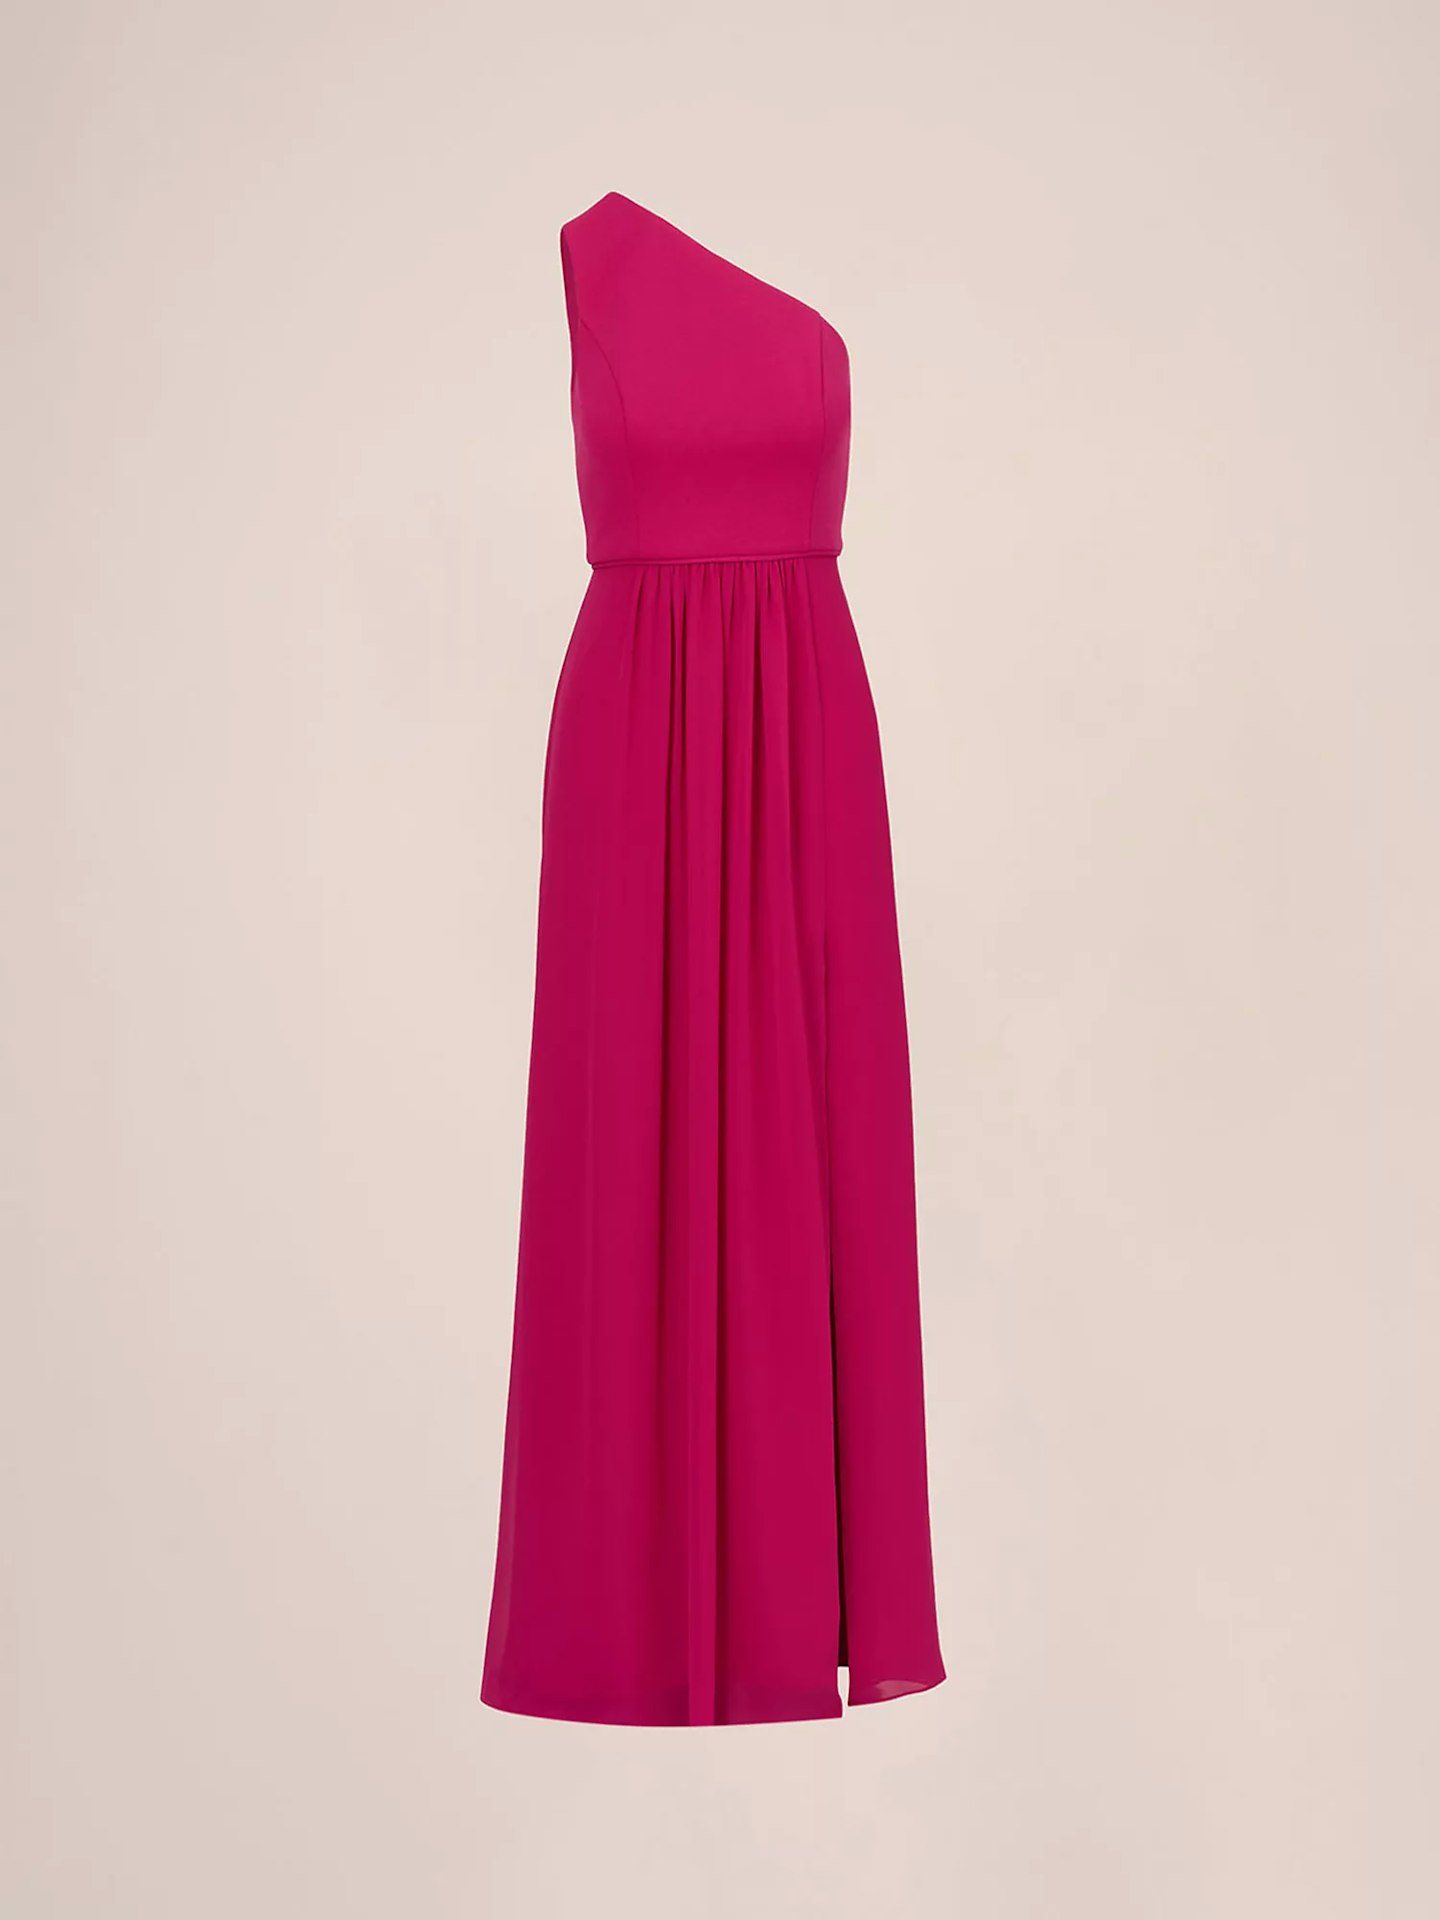 Adrianna Papell, One Shoulder Chiffon Gown